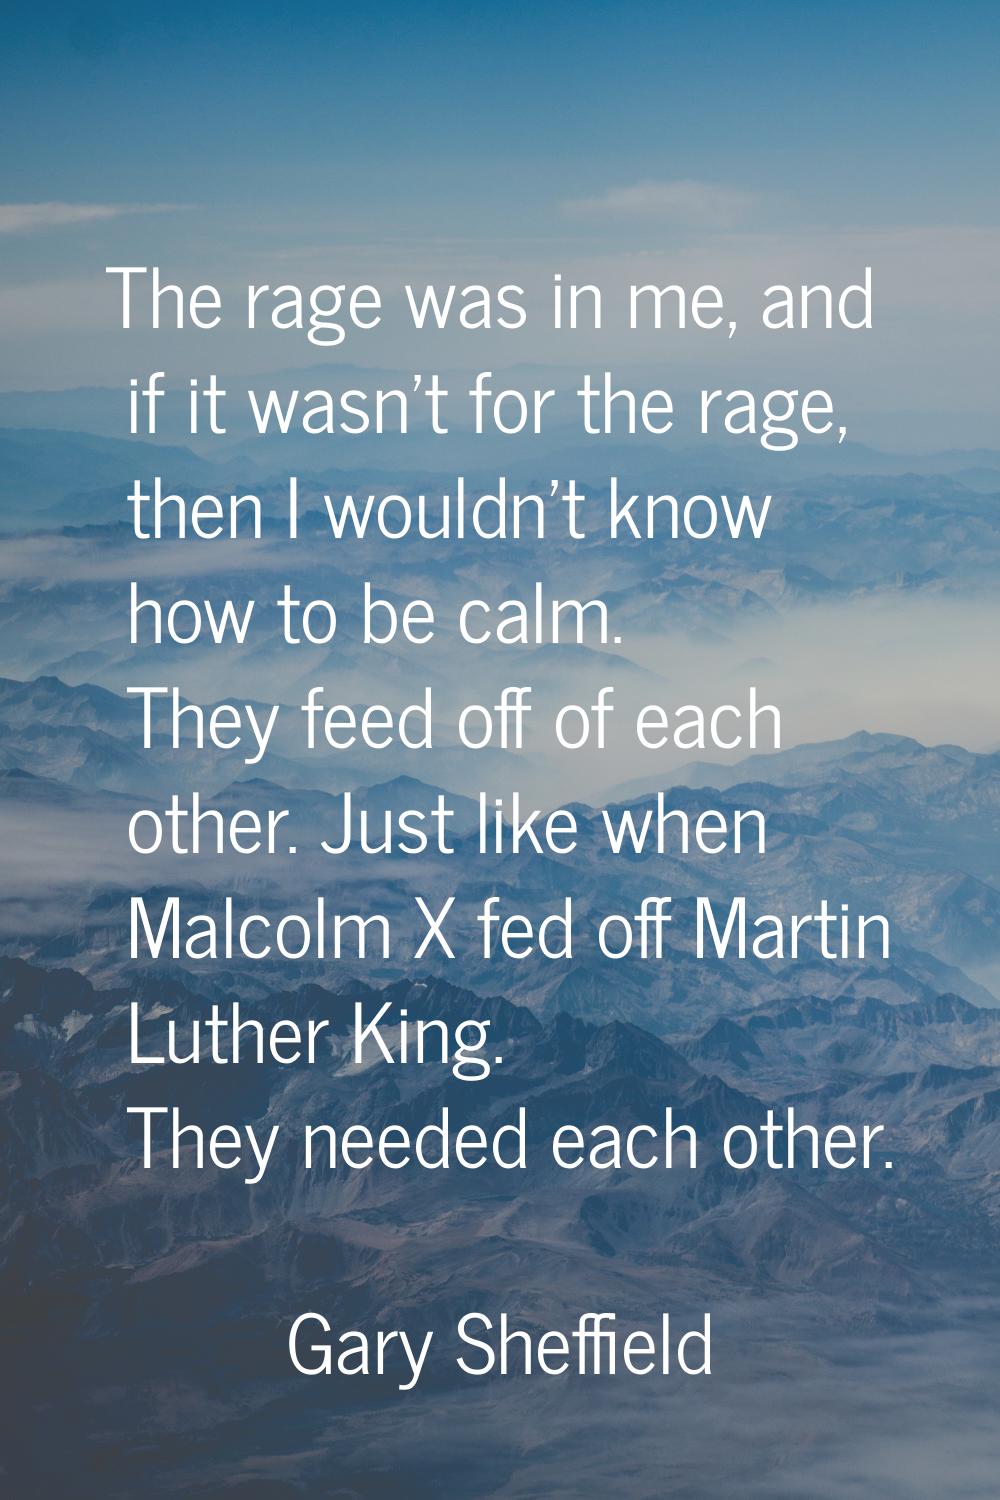 The rage was in me, and if it wasn't for the rage, then I wouldn't know how to be calm. They feed o